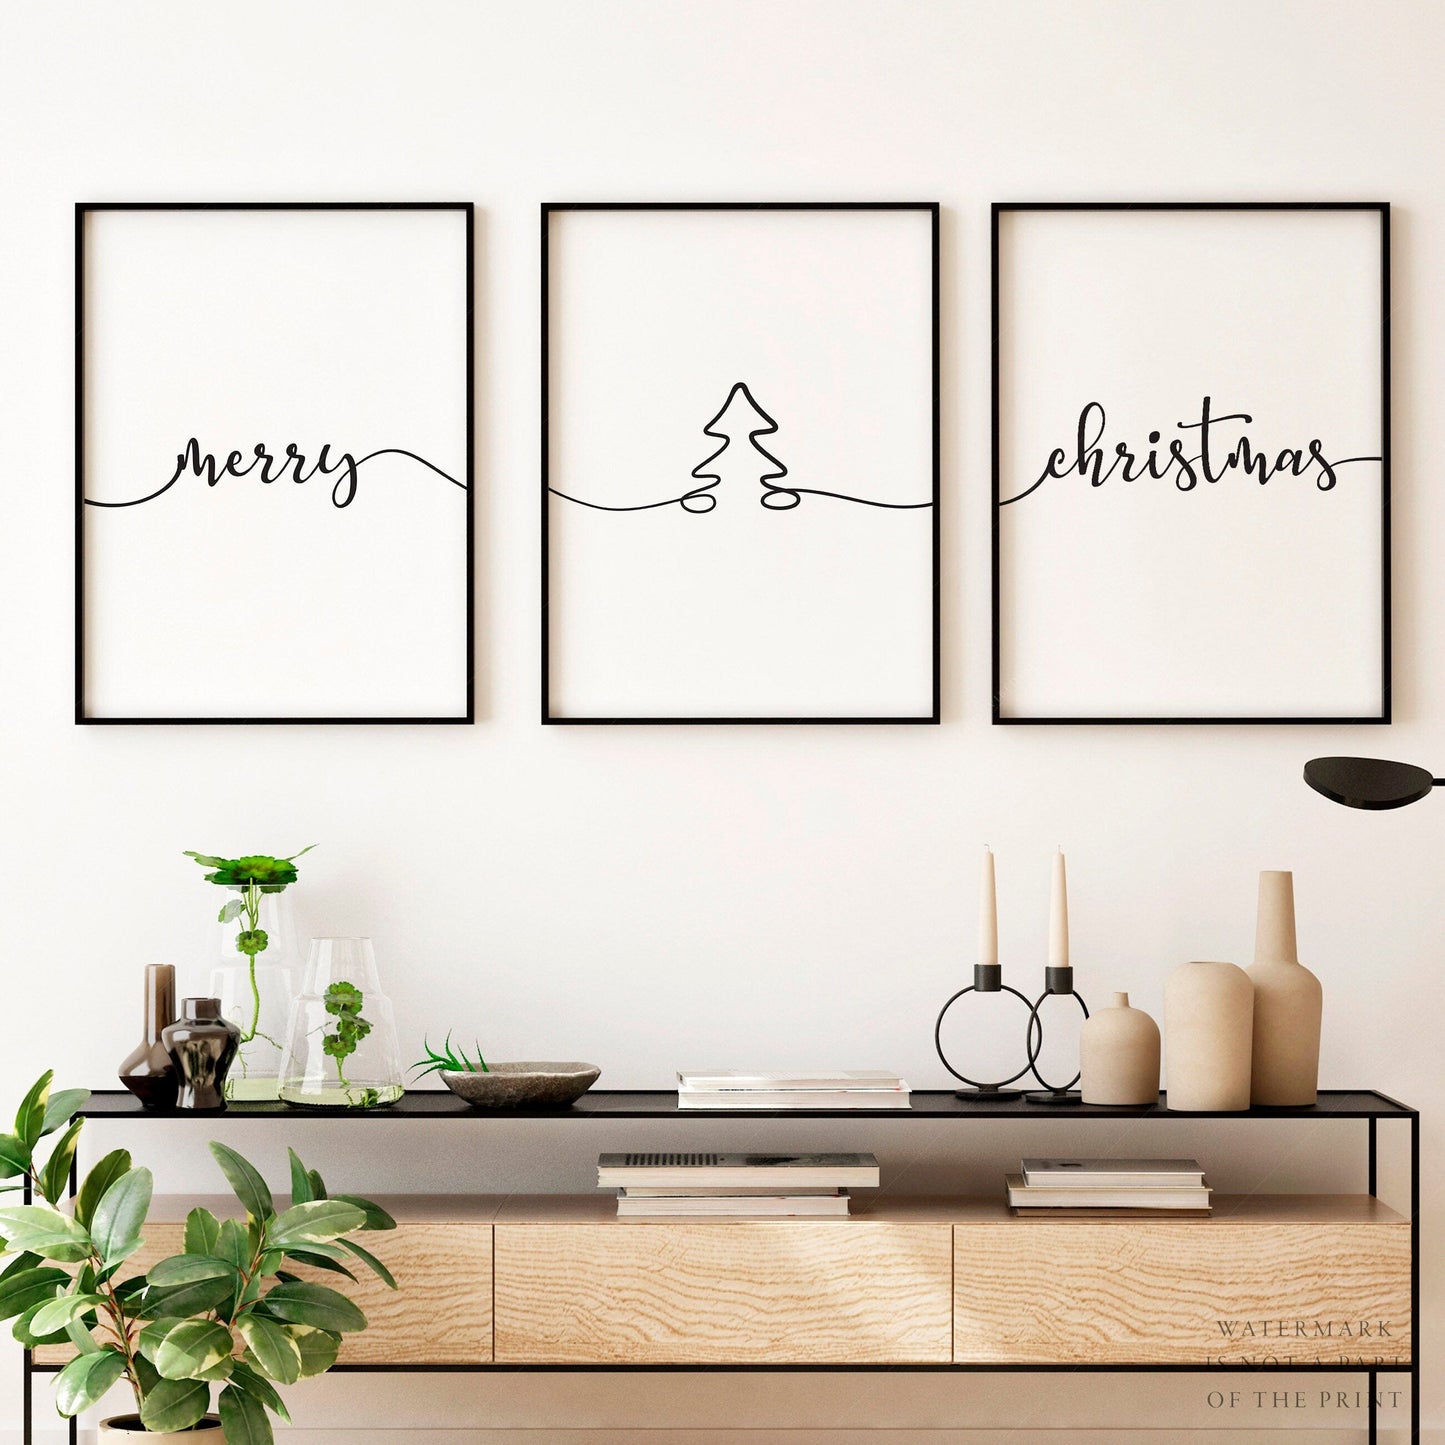 Home Poster Decor Set of 3 Merry Christmas Sign, Christmas Wall Decor, Christmas Quote, Christmas Tree, Christmas Decoration, Christmas Message, Set of 3, Party Decor